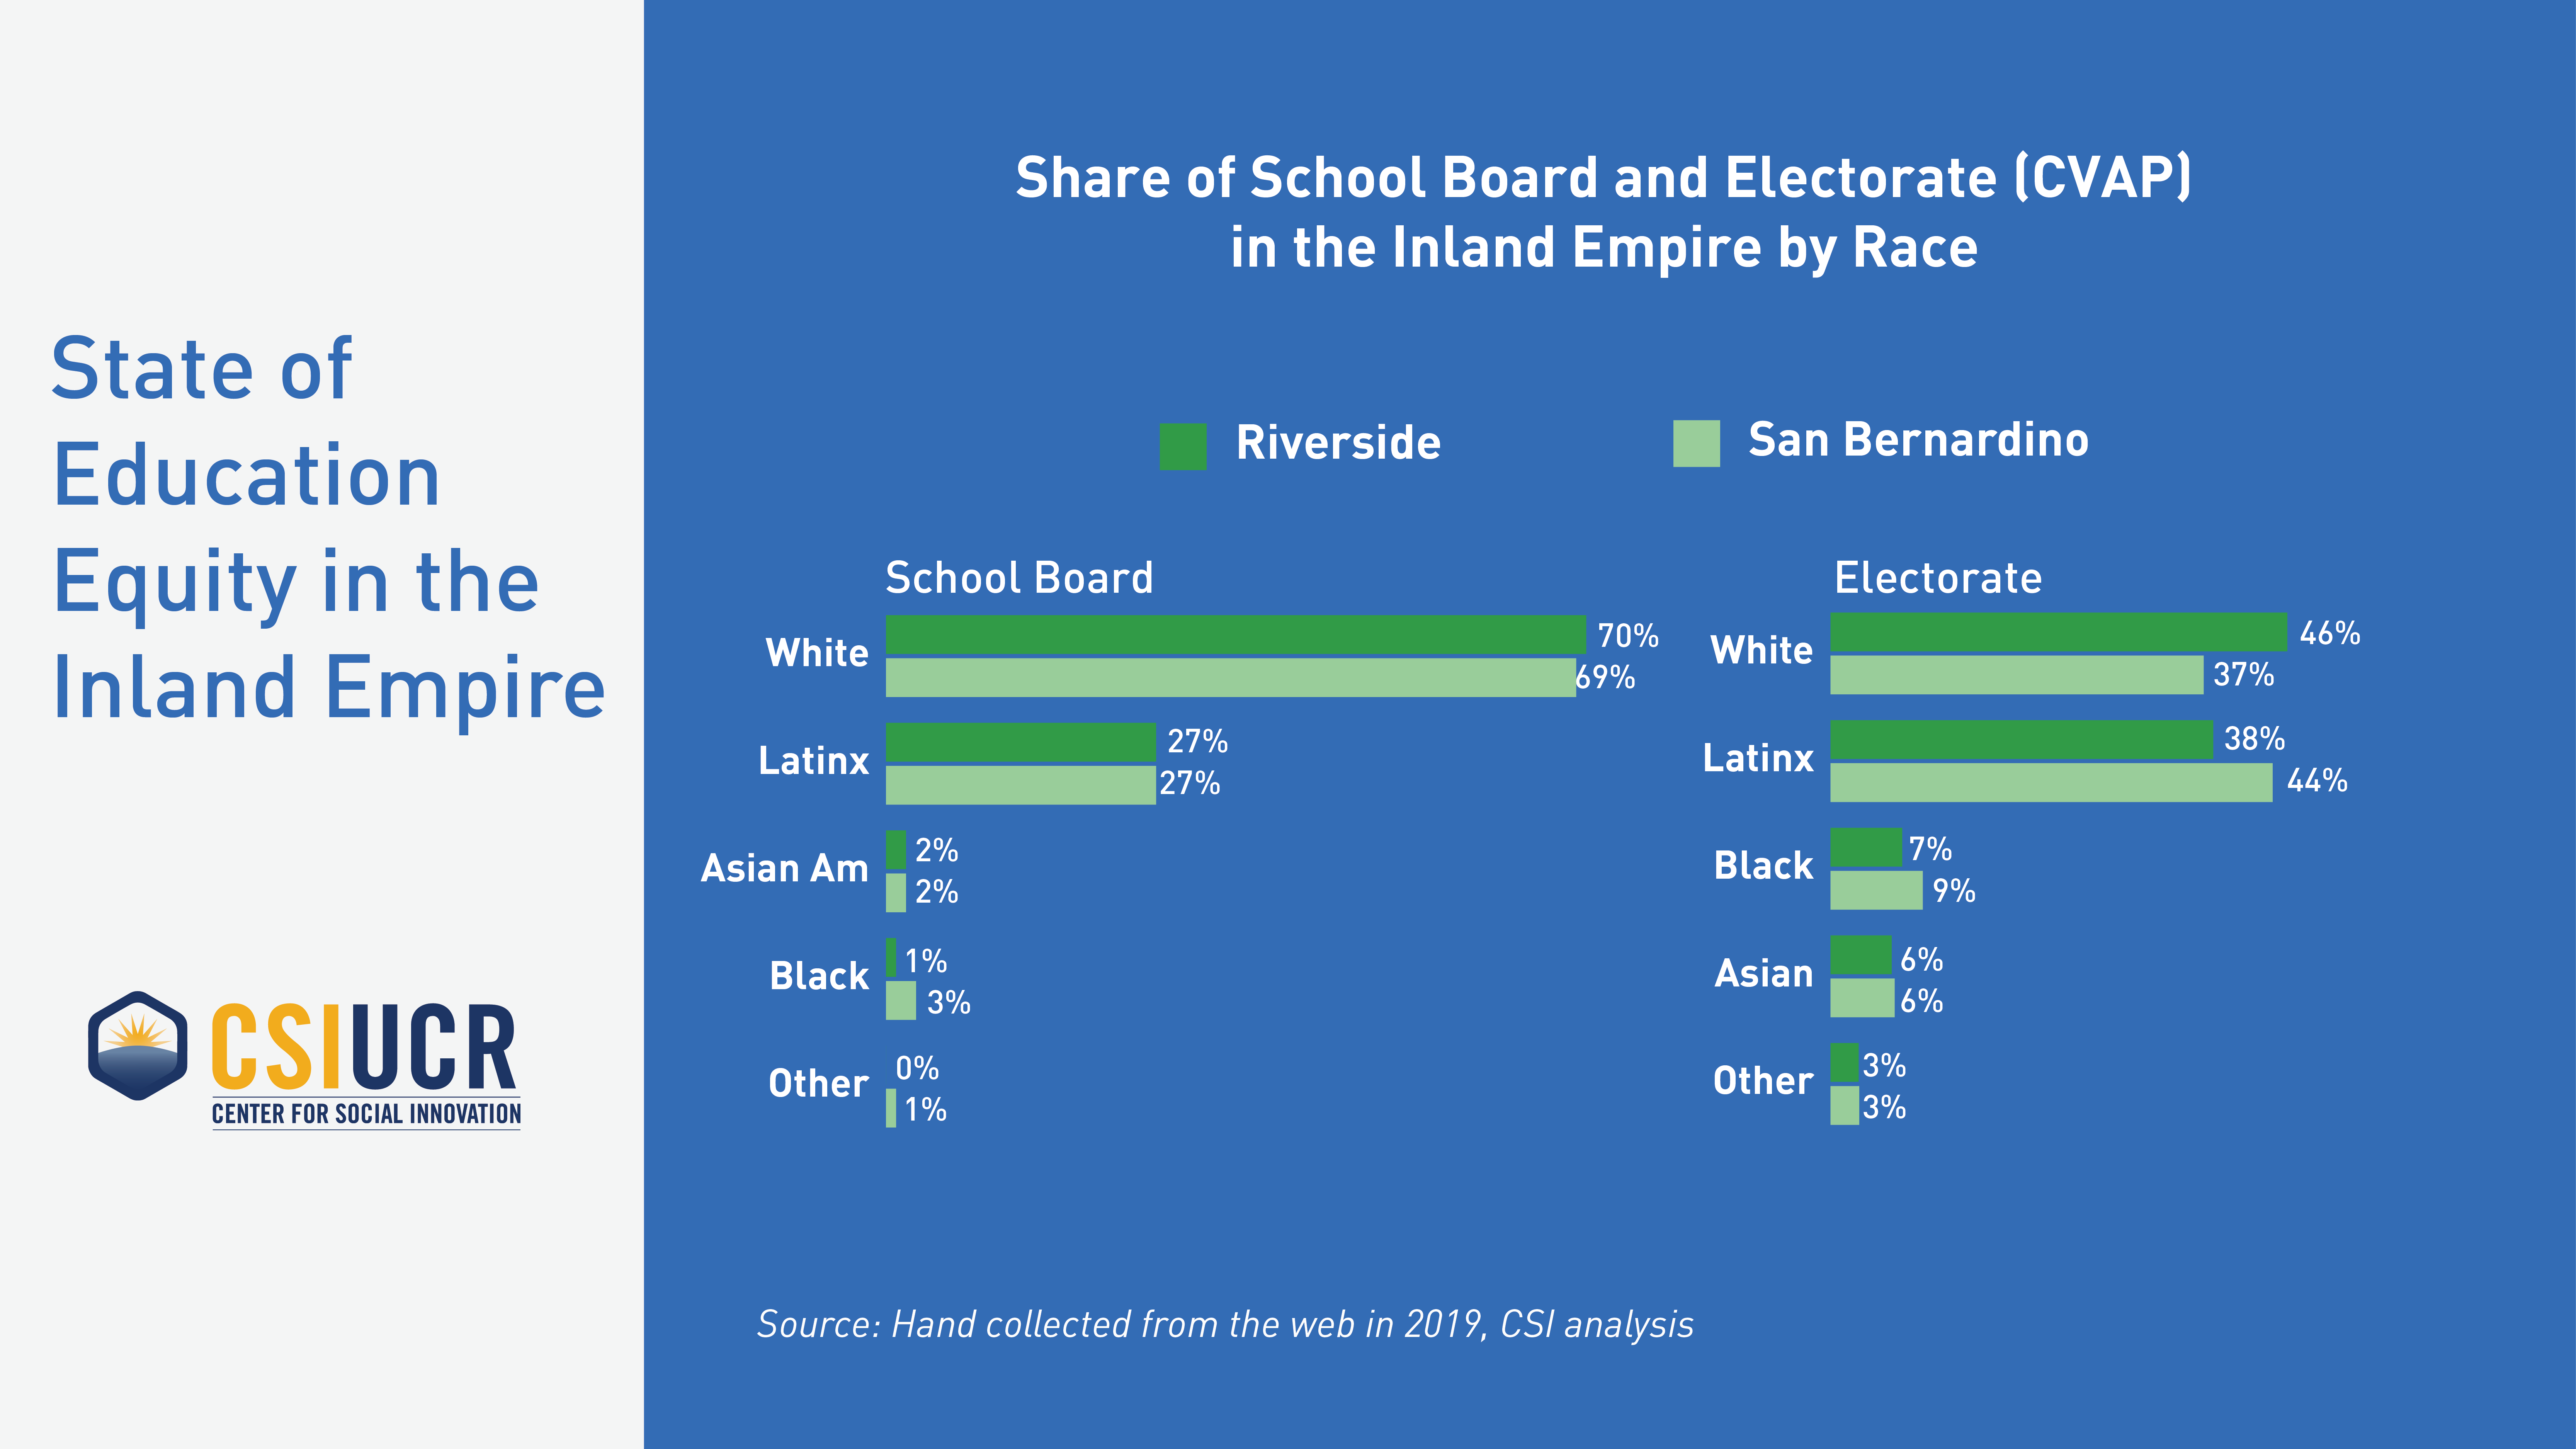 Share of School Board and Electorate (CVAP) in the IE by Race